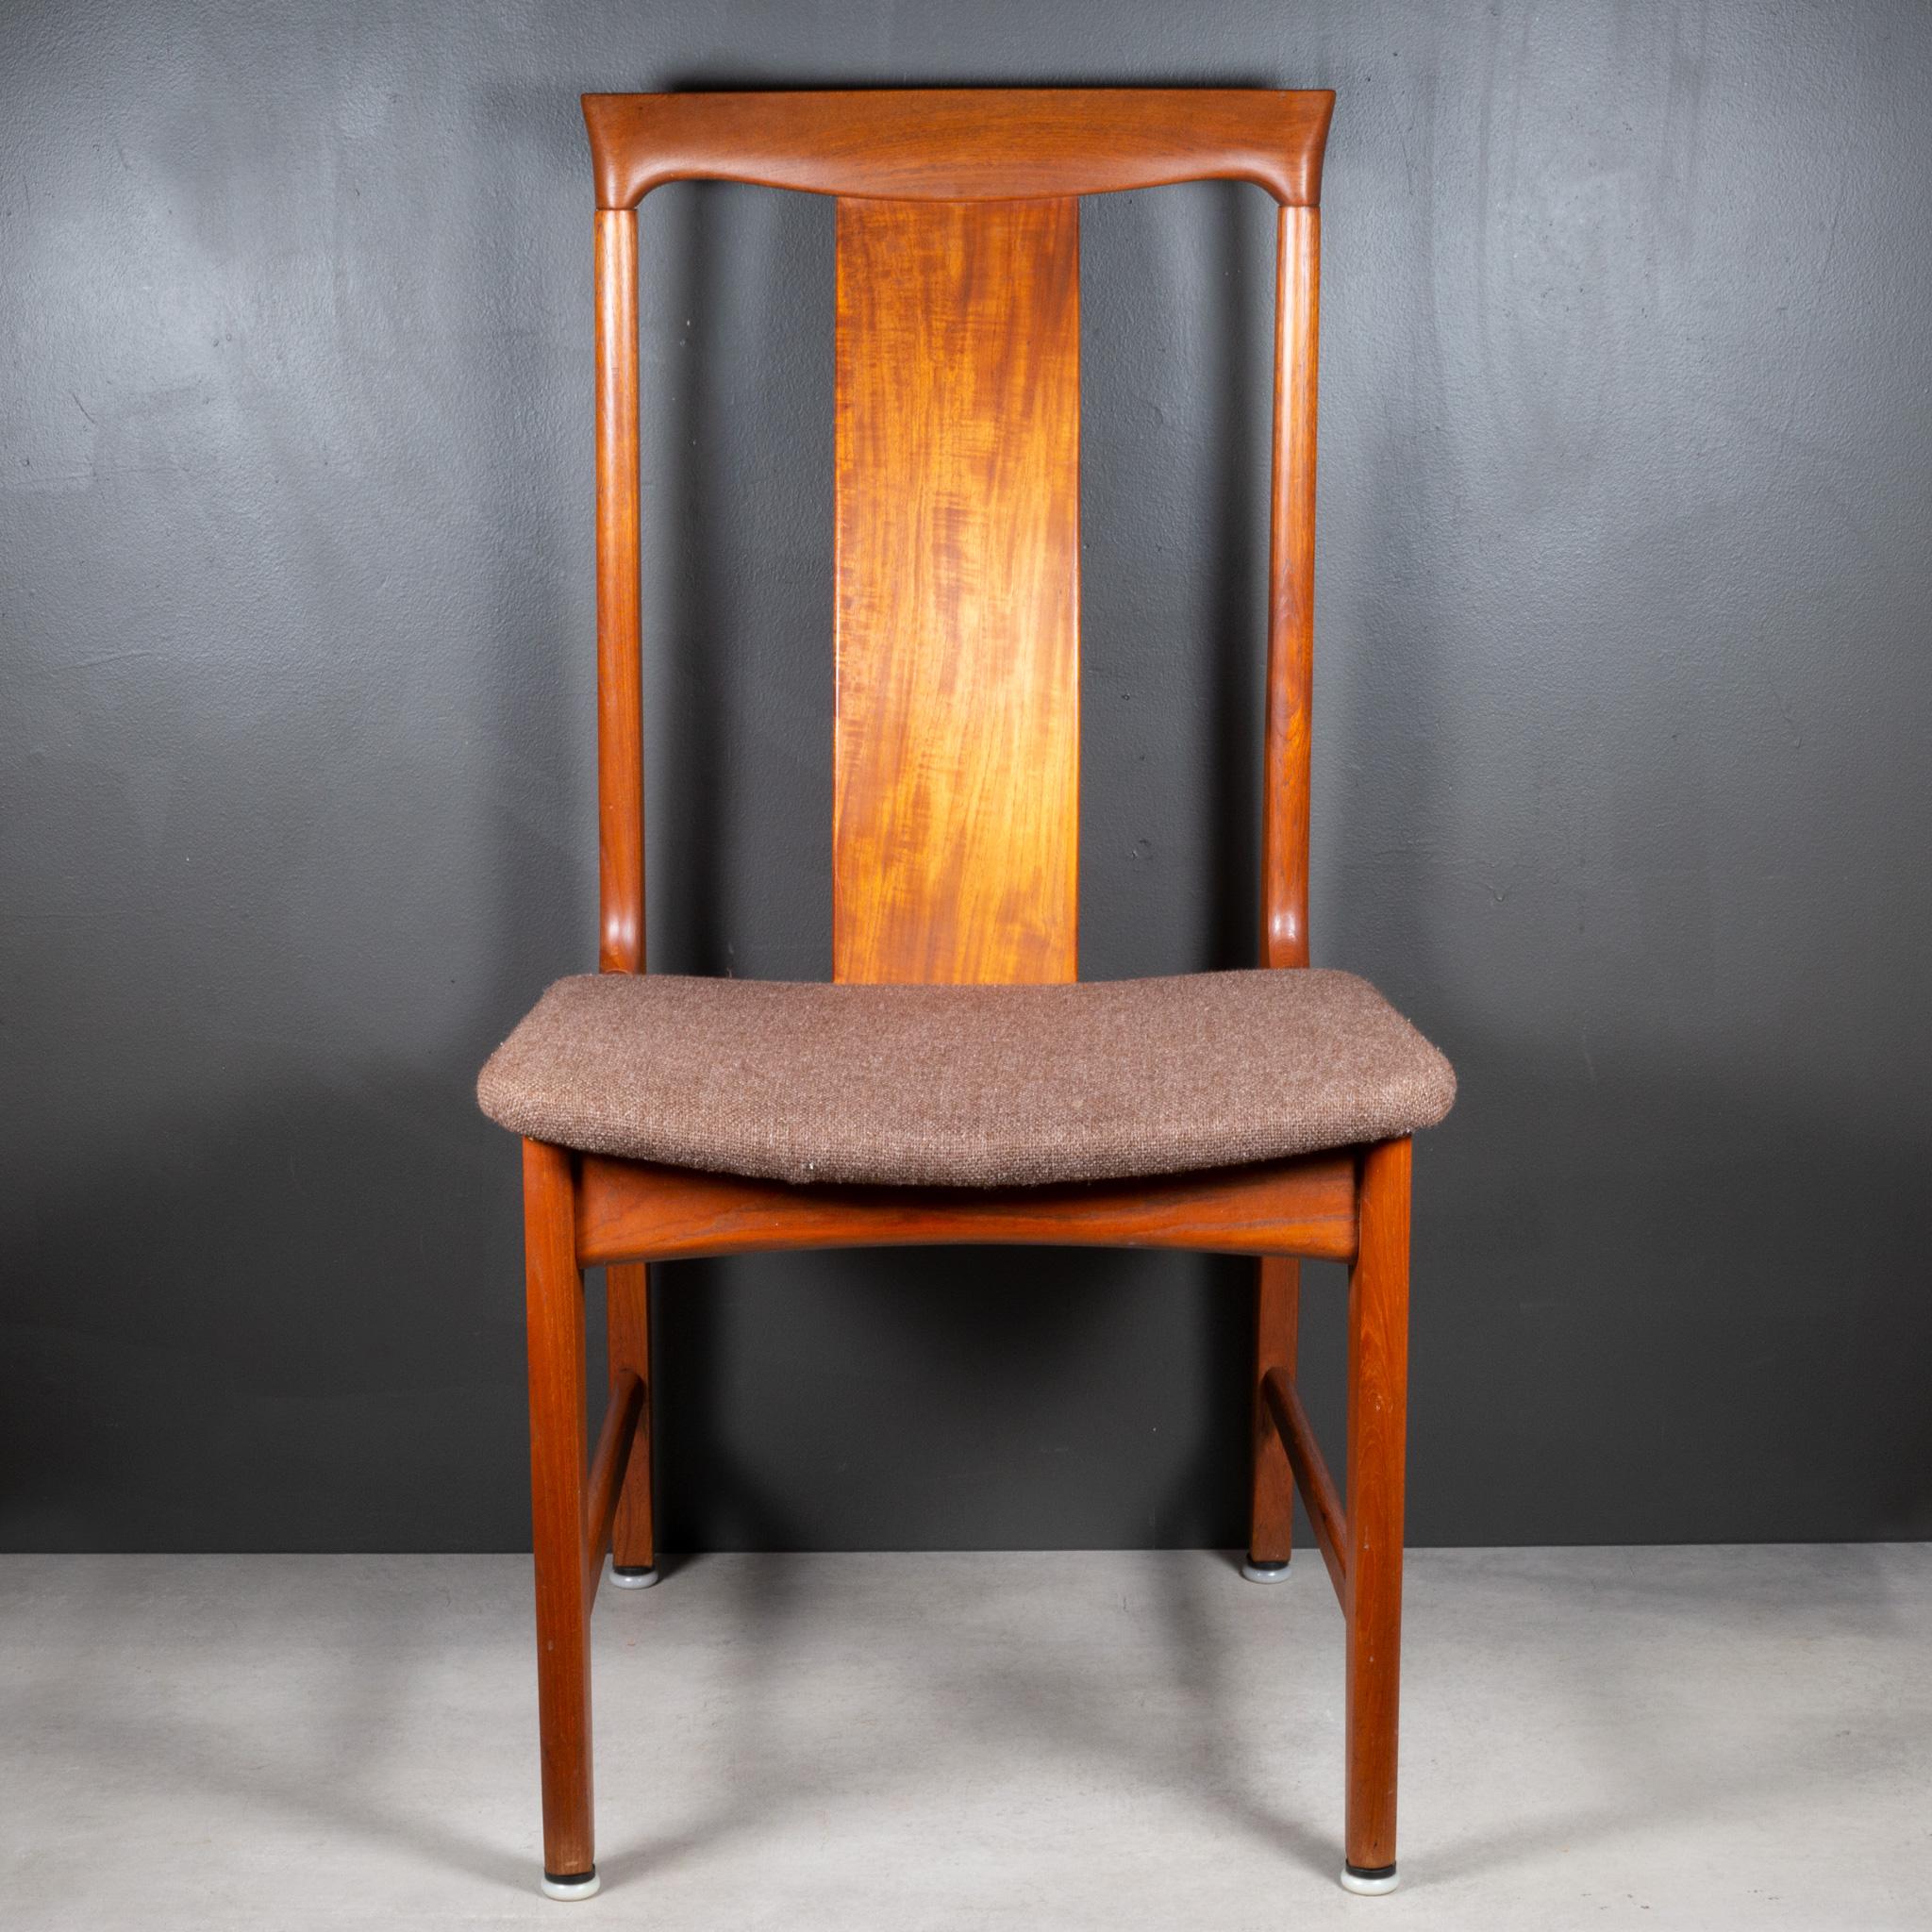 Midcentury Japanese Sculpted Teak Dining Chairs C.1960 For Sale 2